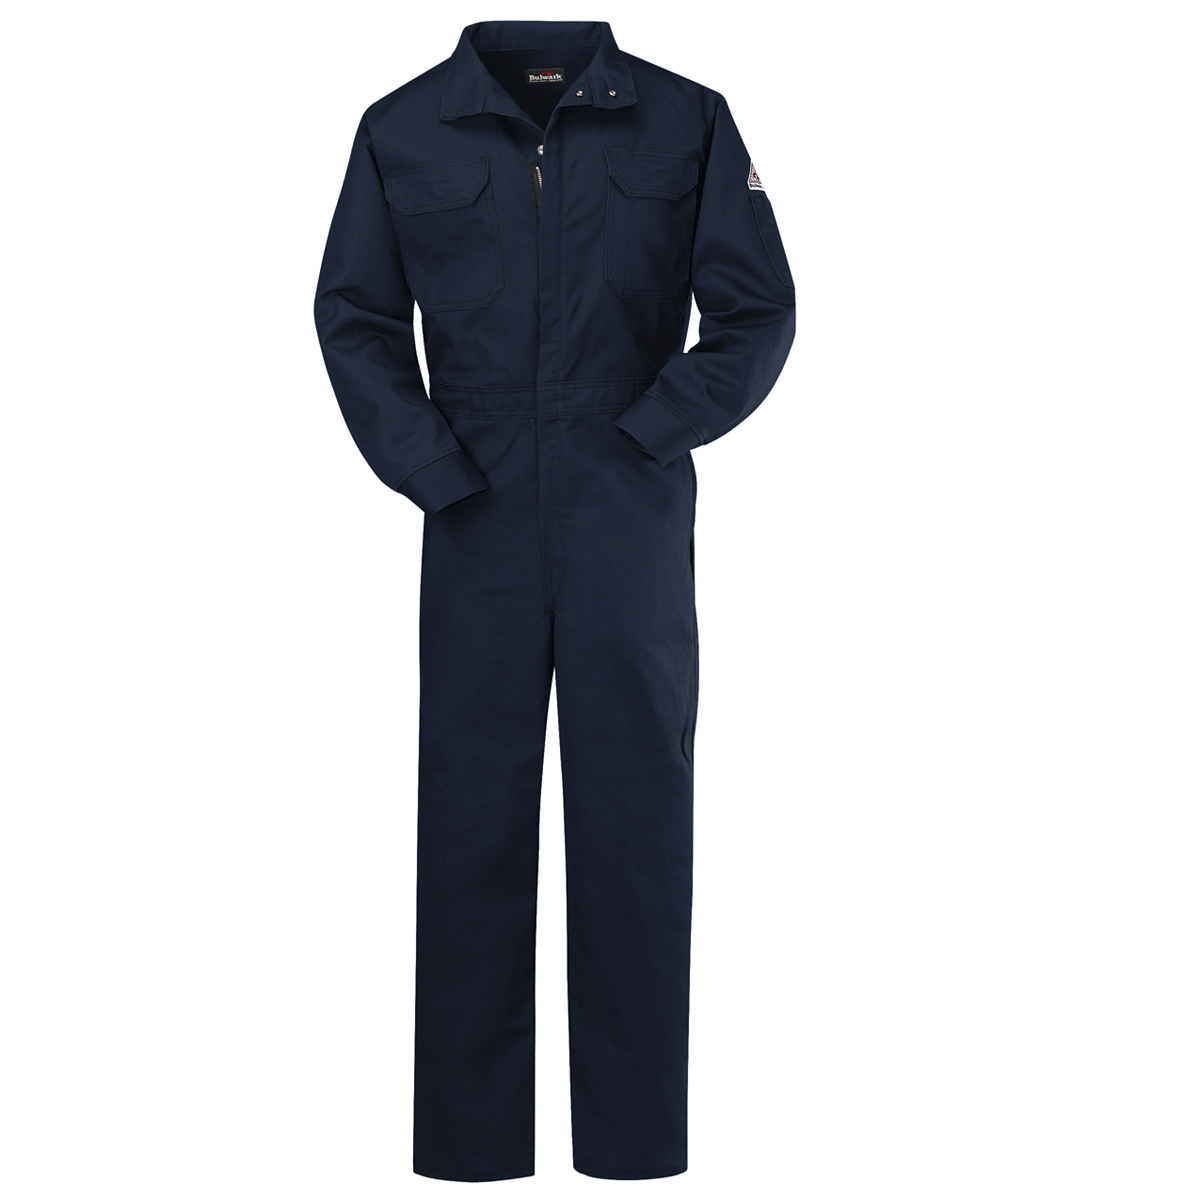 Bulwark® Large Regular Navy Blue Westex Ultrasoft® Twill/Cotton/Nylon Flame Resistant Coveralls With Zipper Front Closure